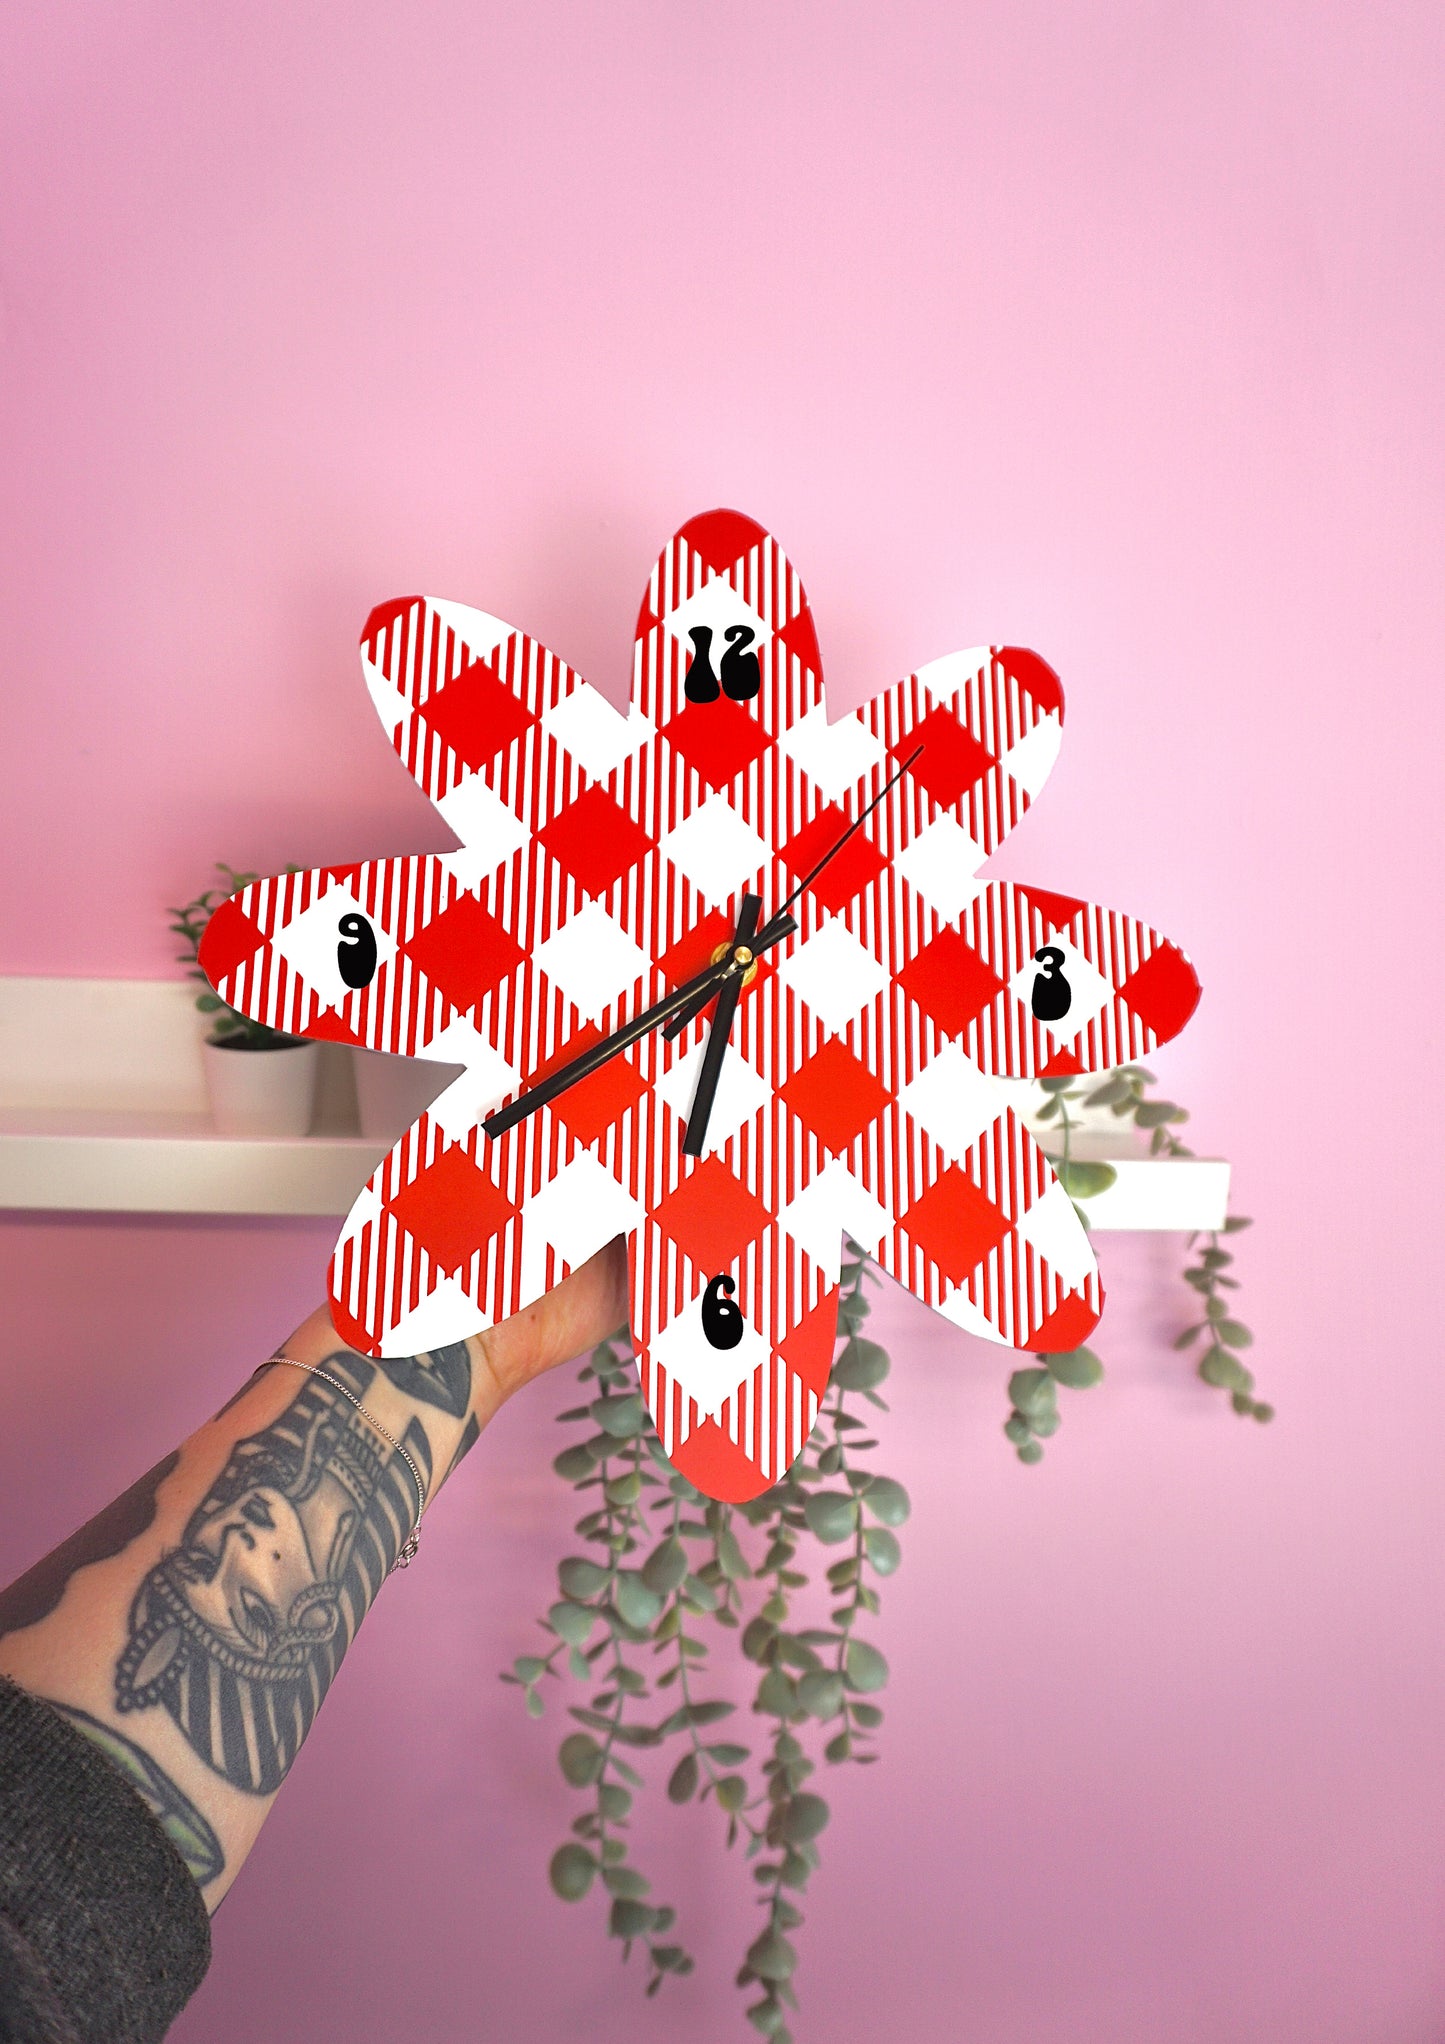 Gingham check pattern flower shaped decorative clock silent movement